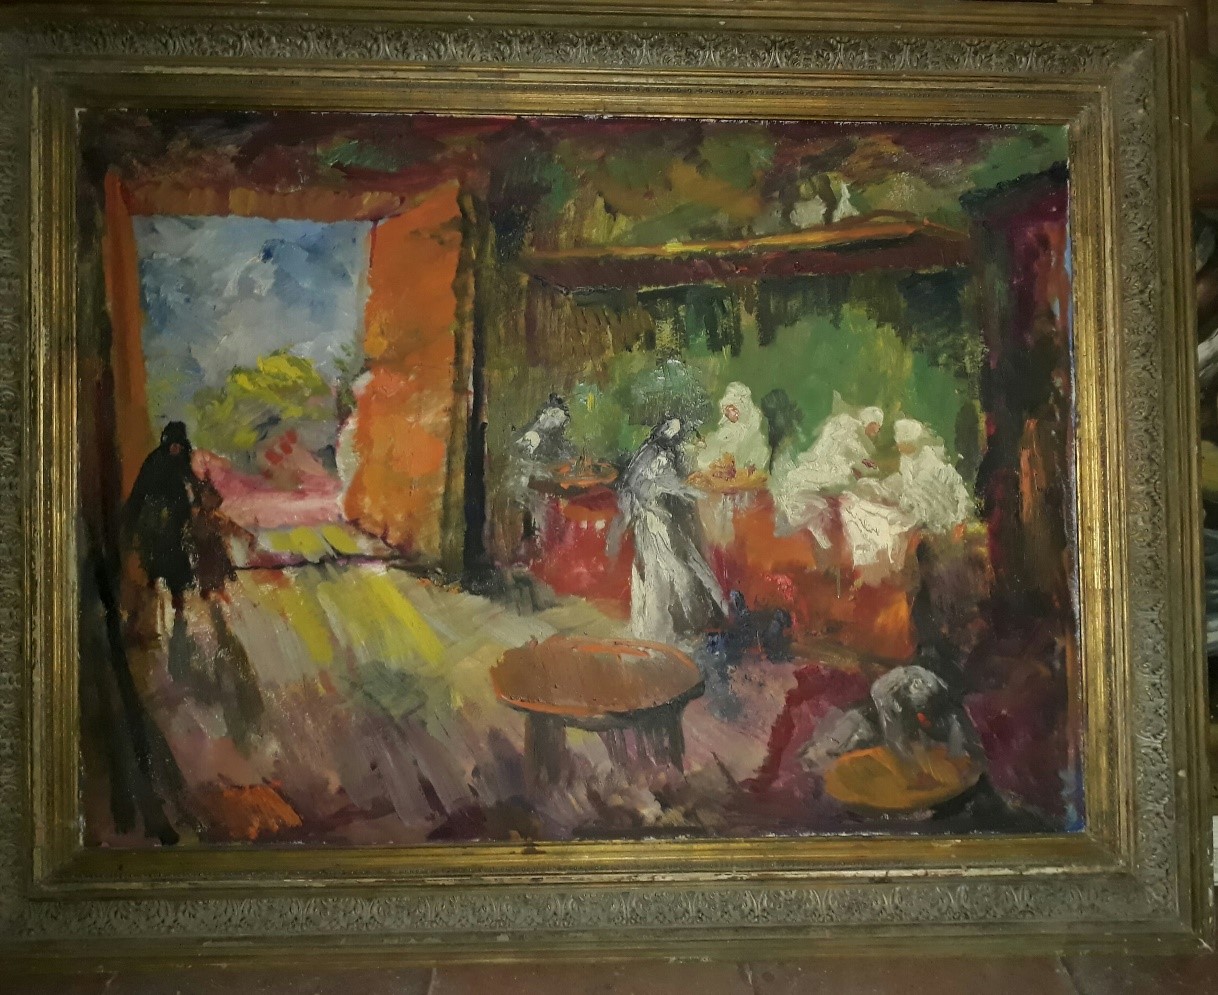 Youssef Kamel (1890-1971)  101 x 74 cm Oil on wood Signed and dated 1965 MG-108-AH